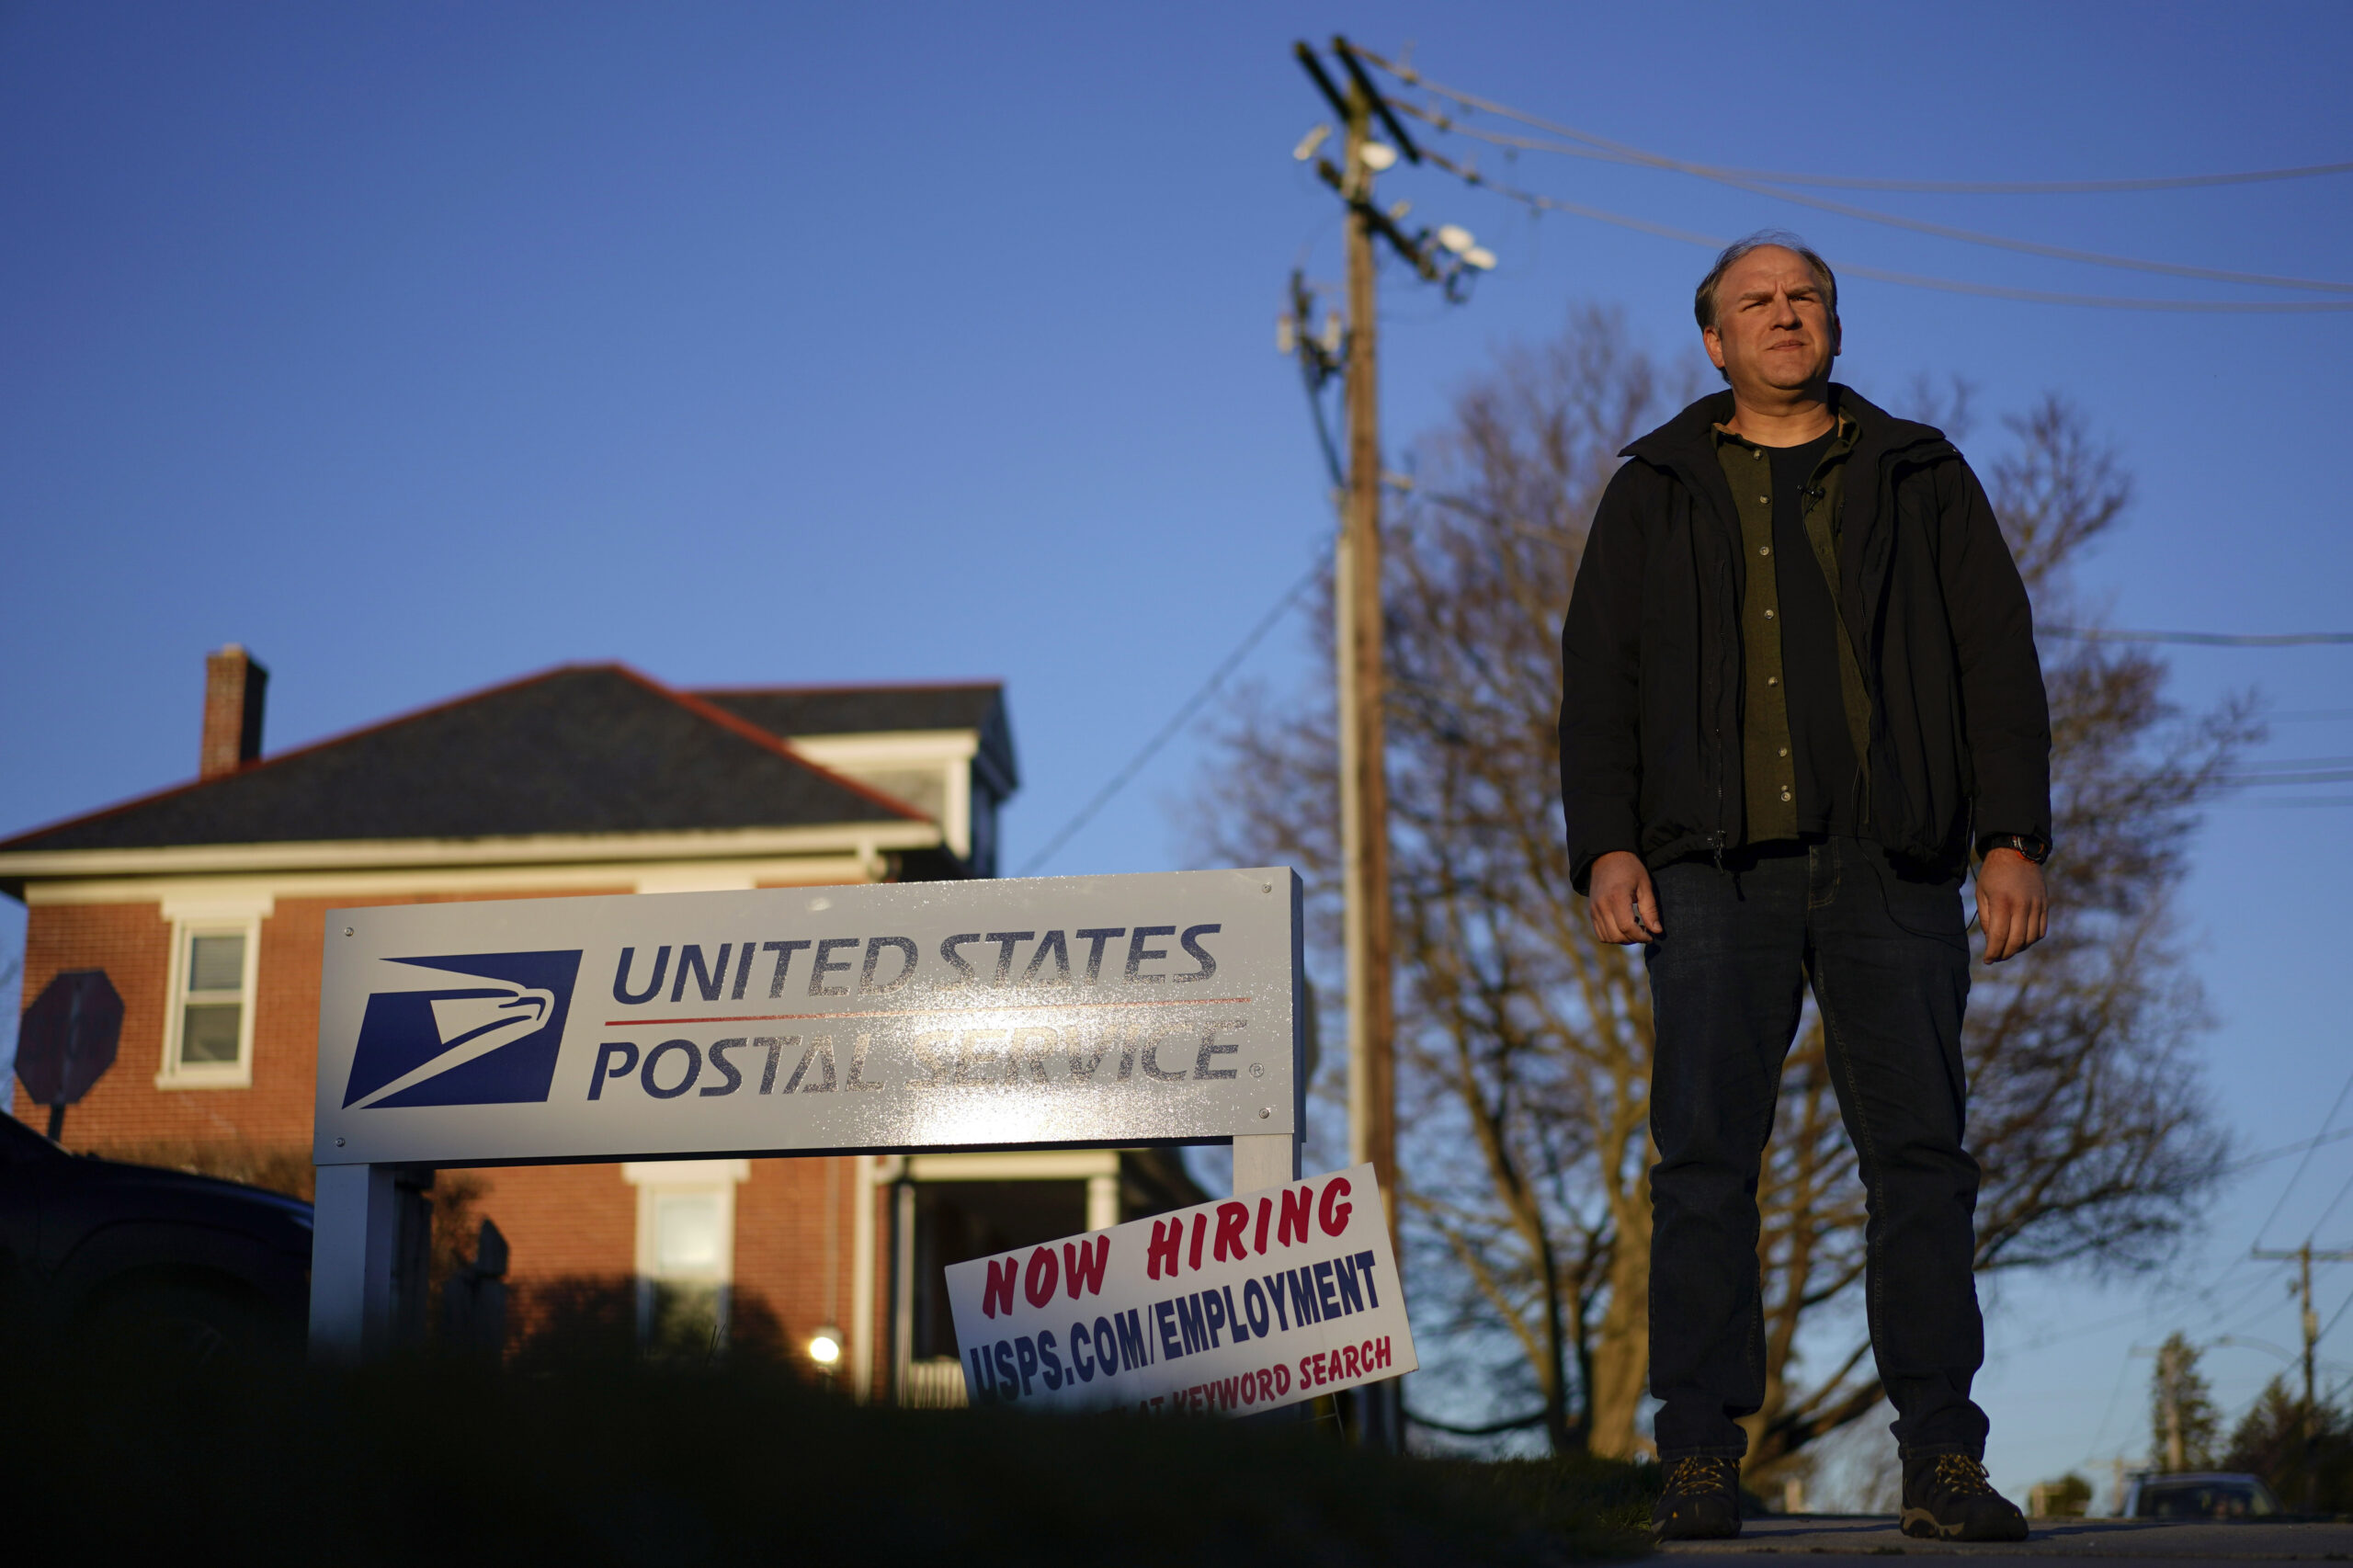 Gerald Groff, a former postal worker whose case will be argued before the Supreme Court, stands dur...